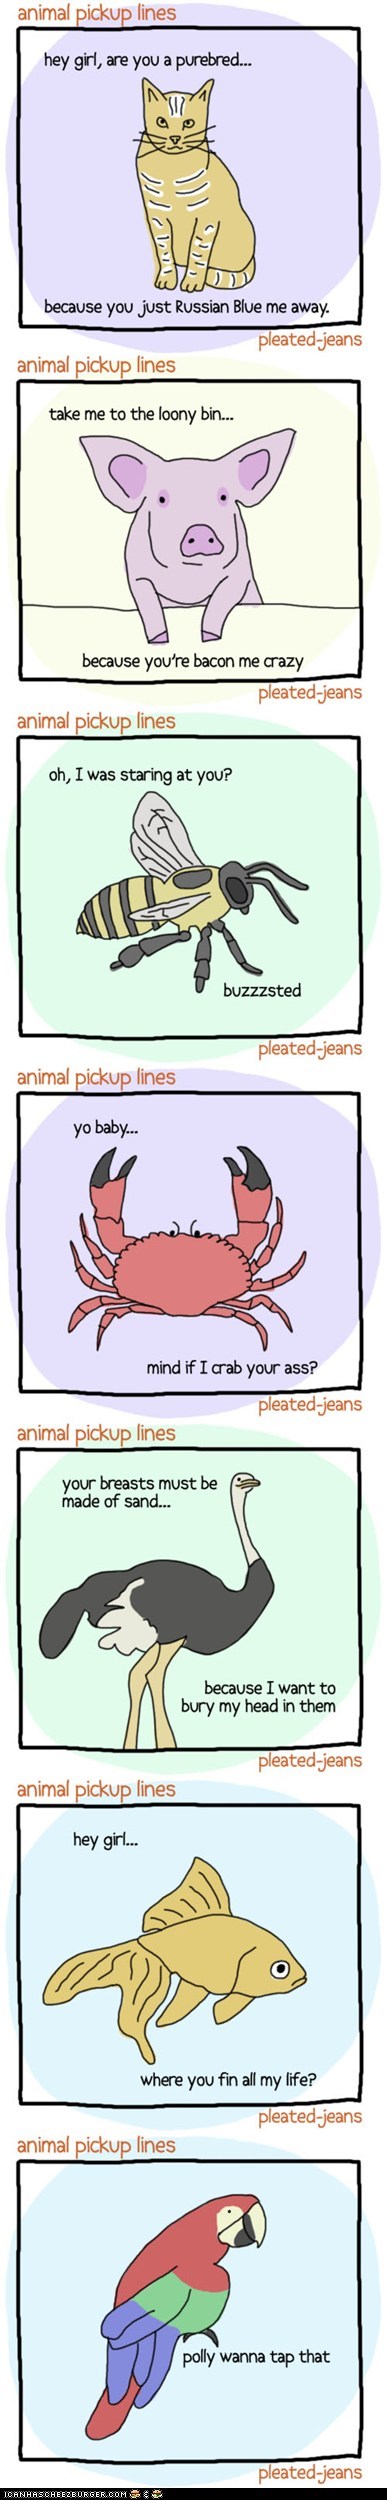 assorted-animal-pickup-lines